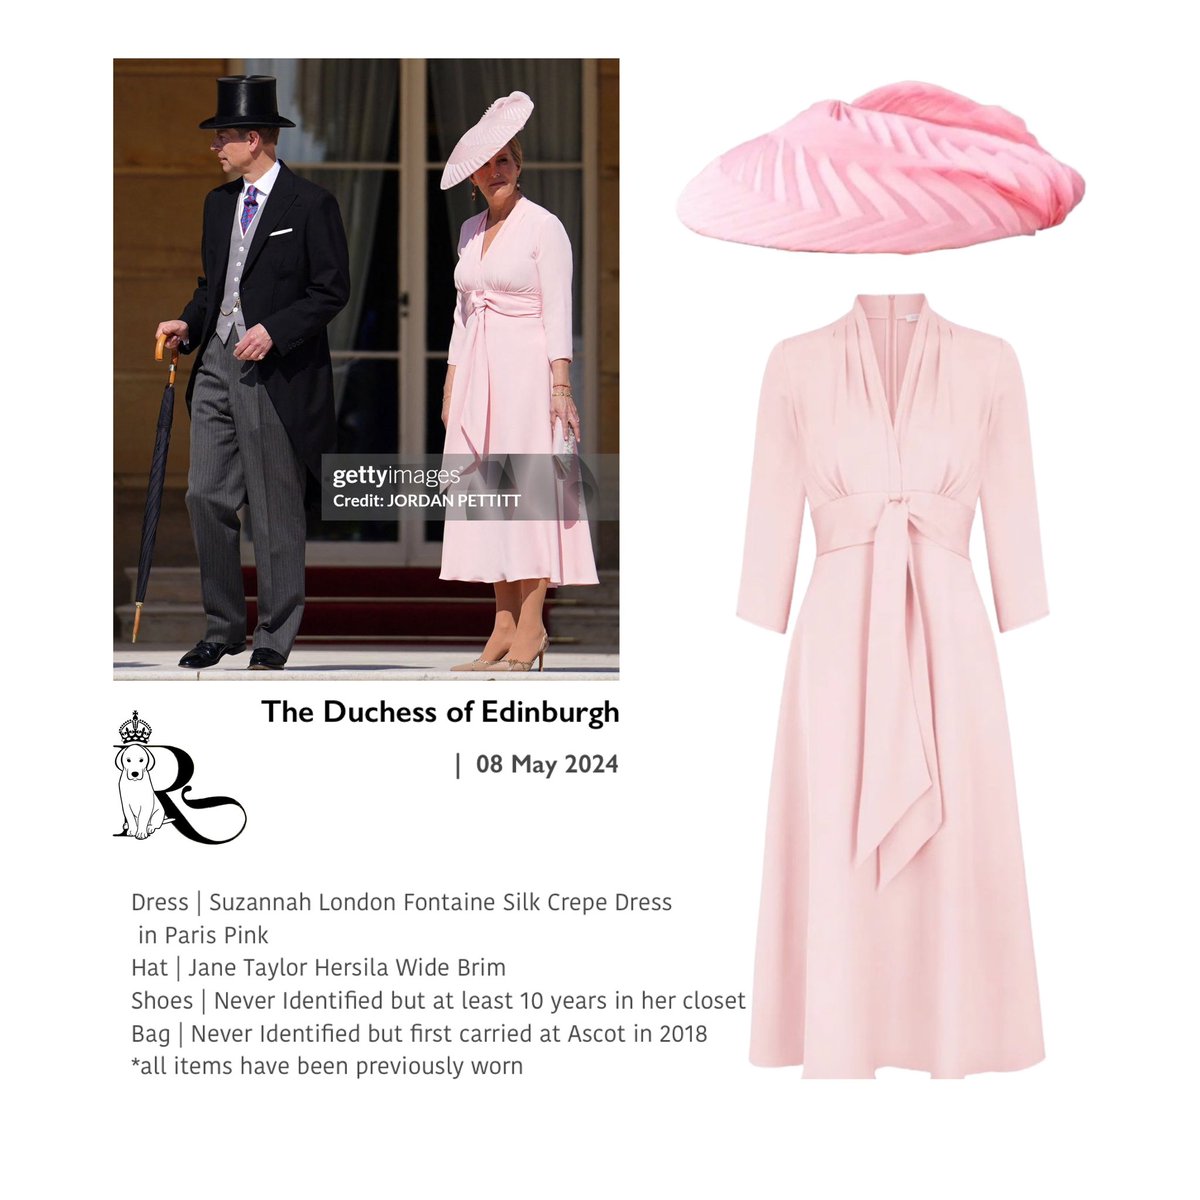 Prince Edward, The Duke of Edinburgh and Sophie, The Duchess of Edinburgh attended a Royal Garden Party at Buckingham Palace Today.  Sophie’s outfit details are below 🌸🌸
#TheDuchessofEdinburgh #TheDukeofEdinburgh #SuperSophie